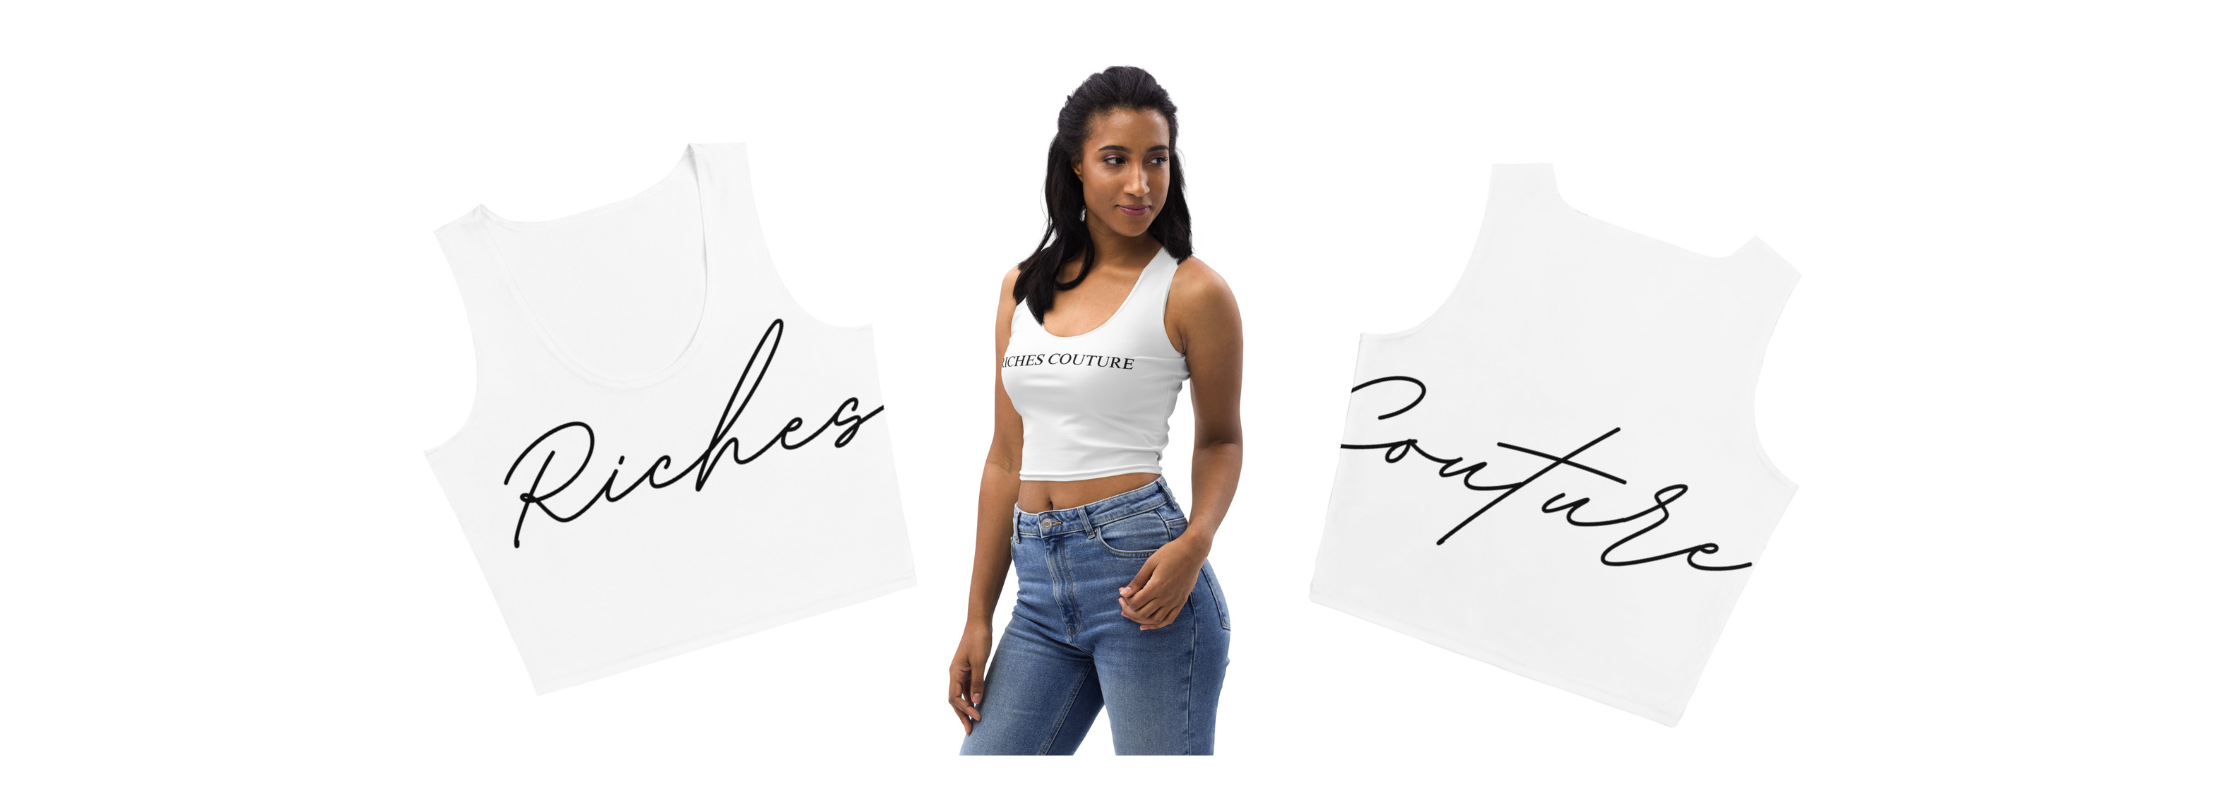 Womens Cropped Tank Tops